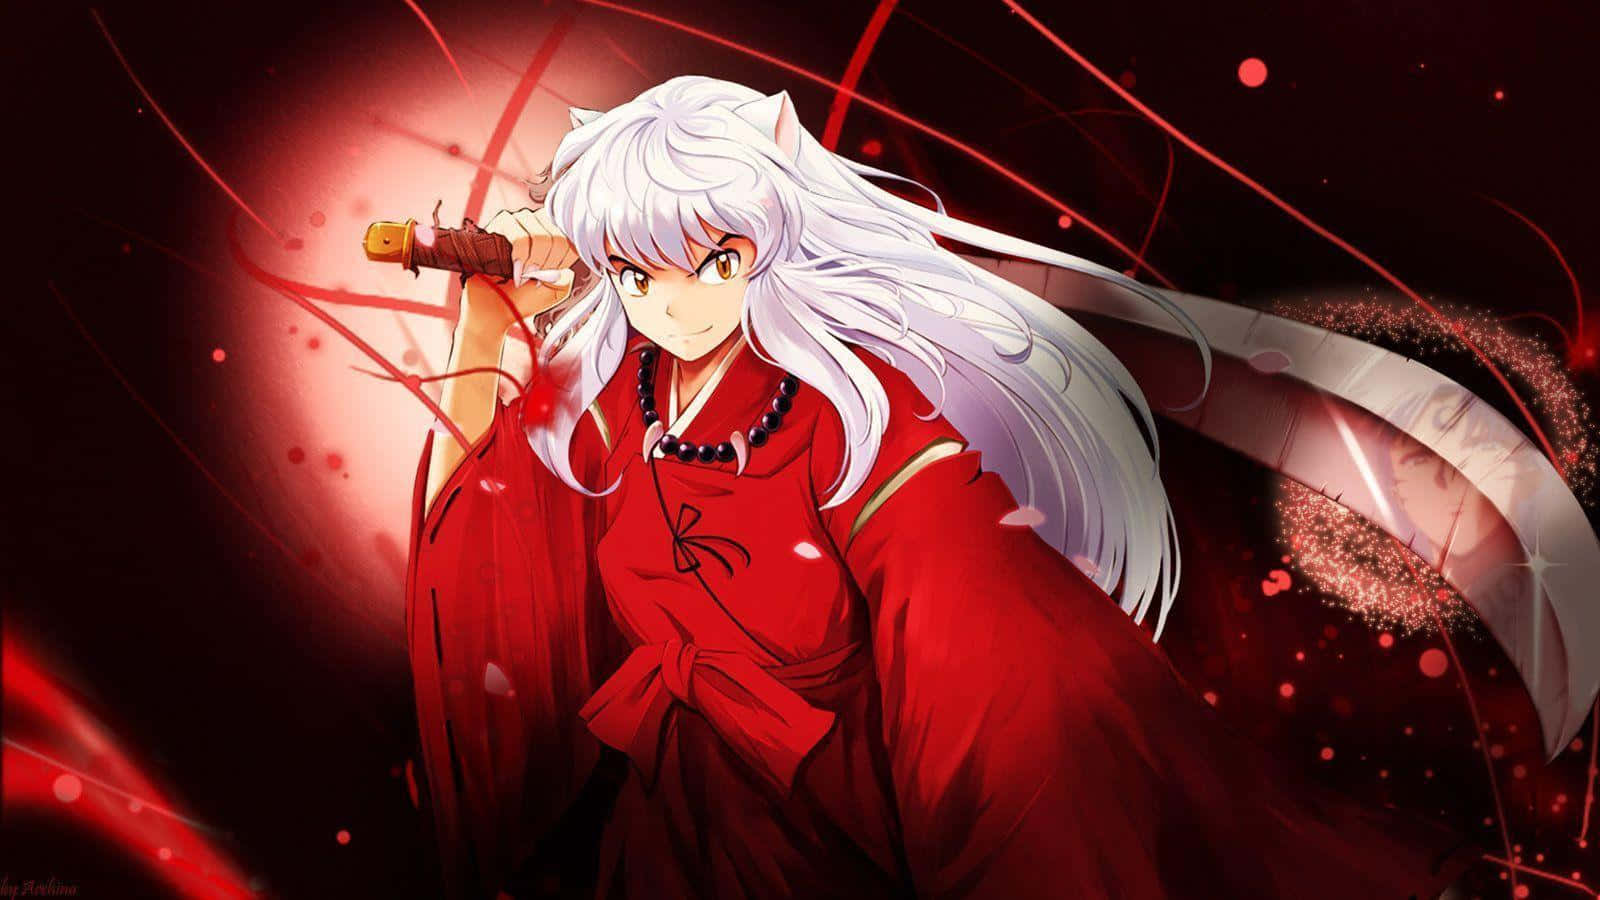 A Memorable Scene from the Classic Anime, Inuyasha